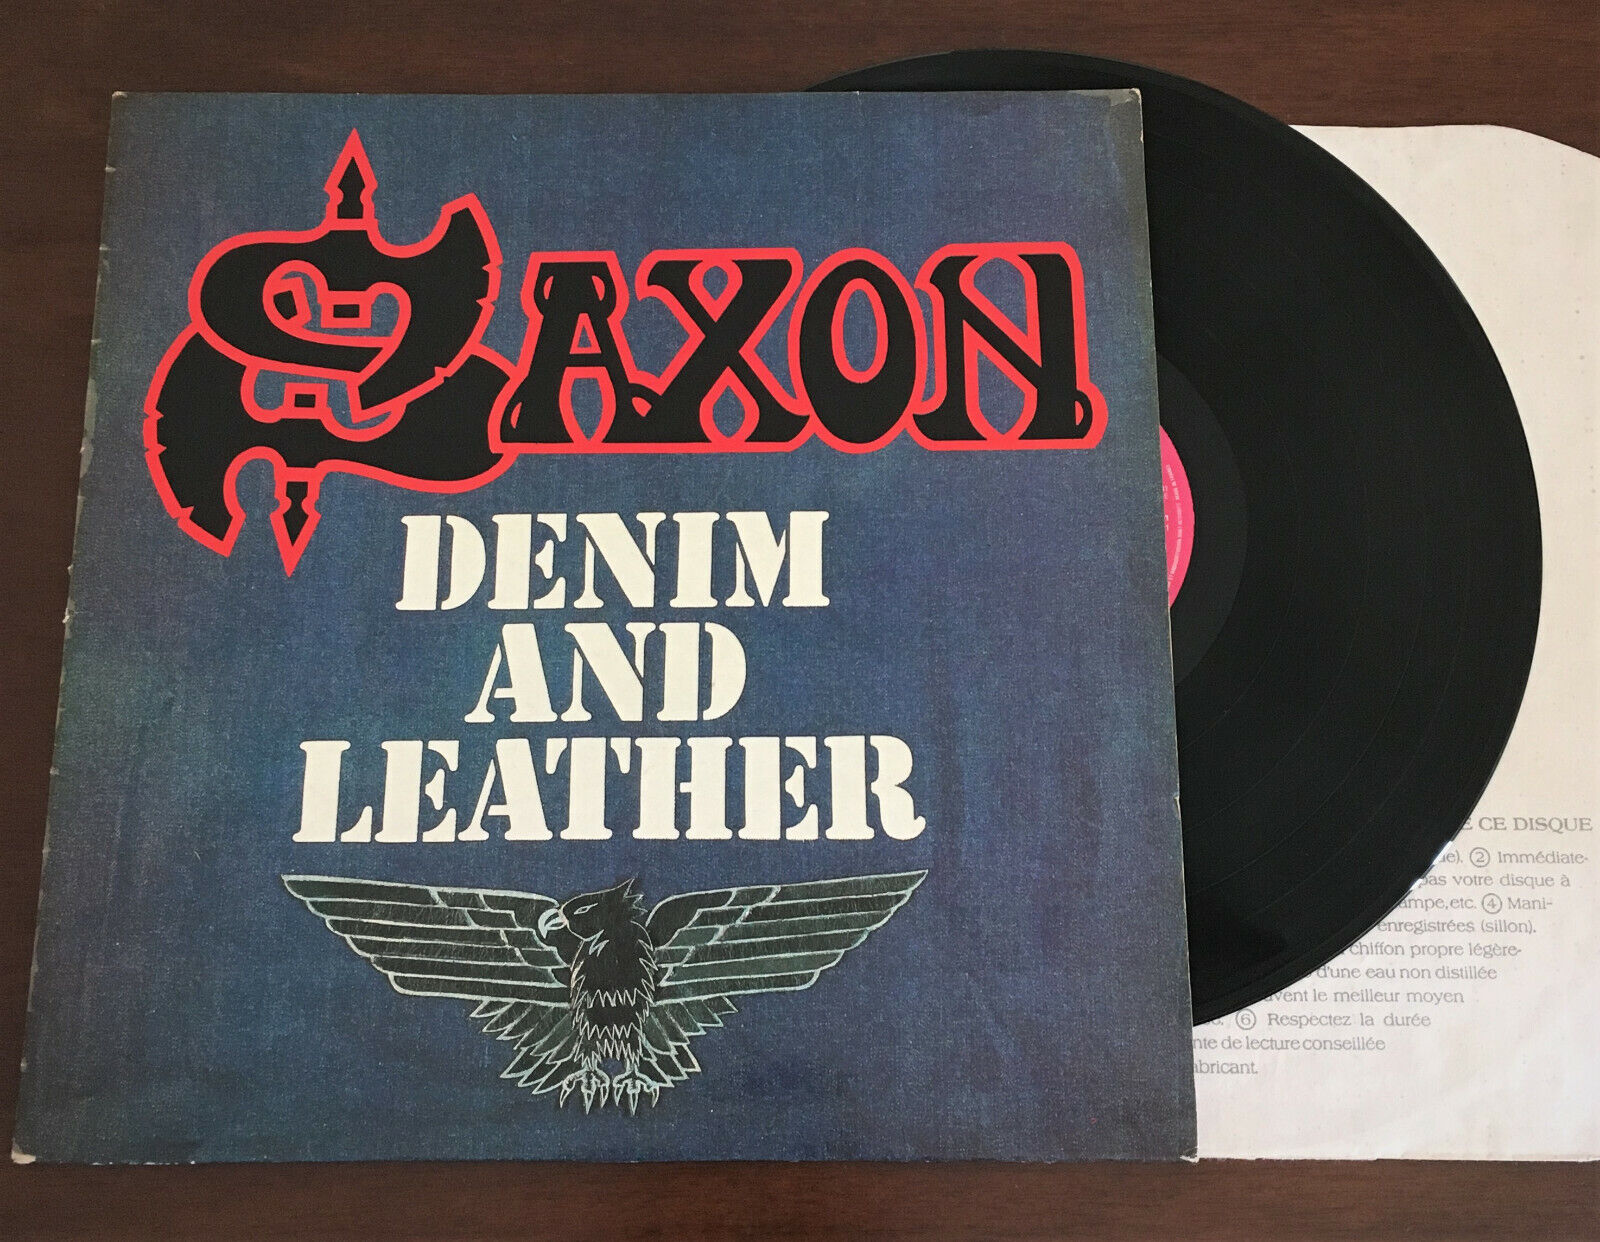 Saxon - Denim and Leather 1st Press French Vinyl \'81 LP Laminated Cover Rare VG+